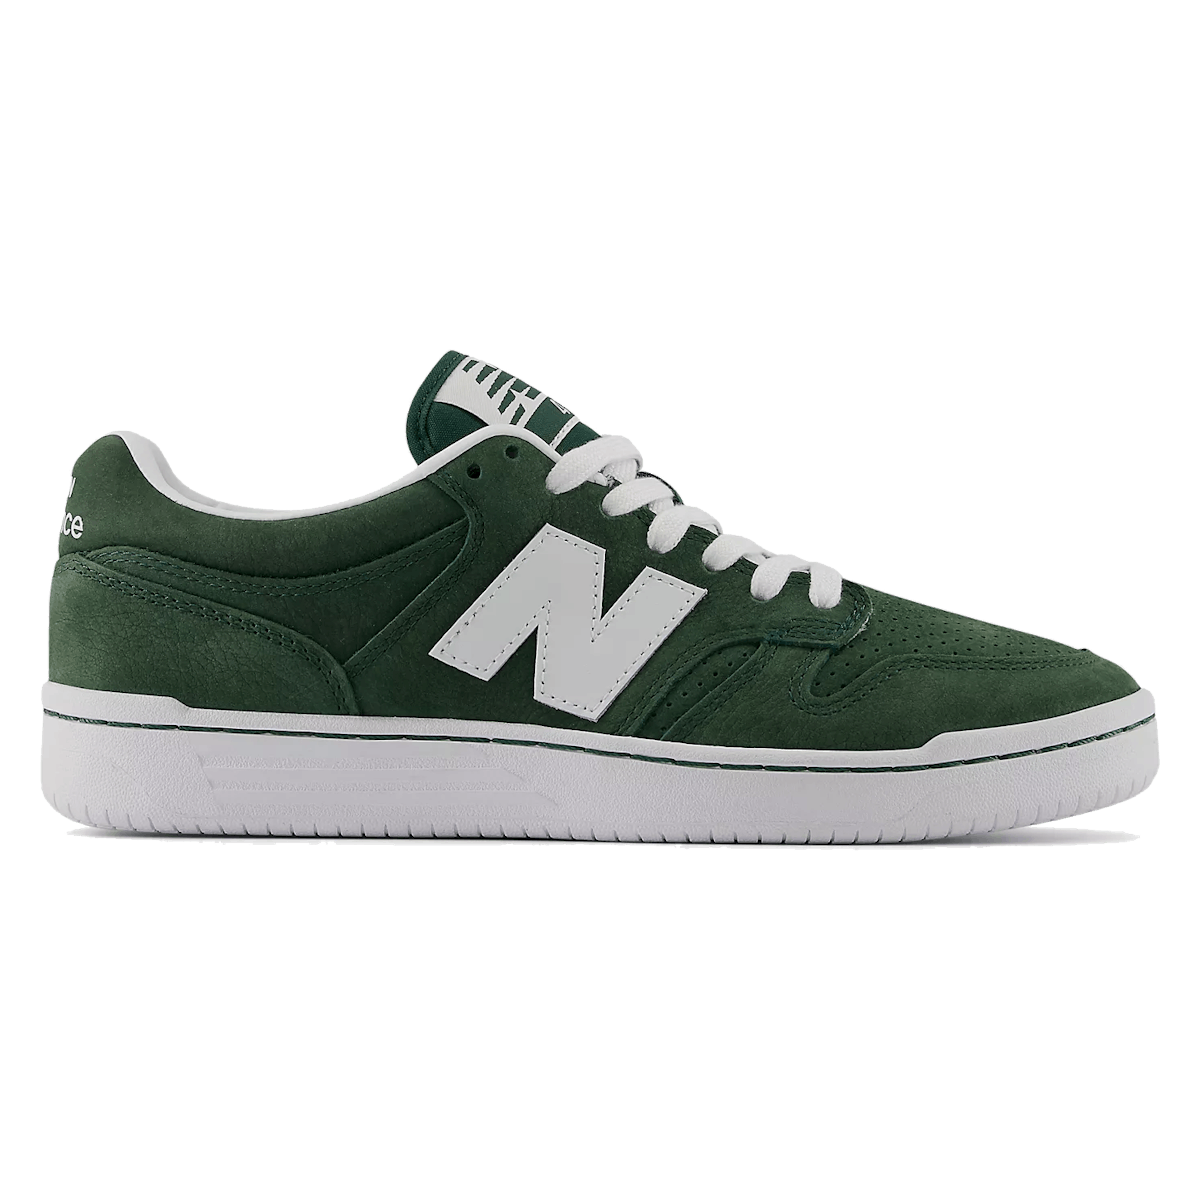 New Balance Numeric 480 "Forest Green"